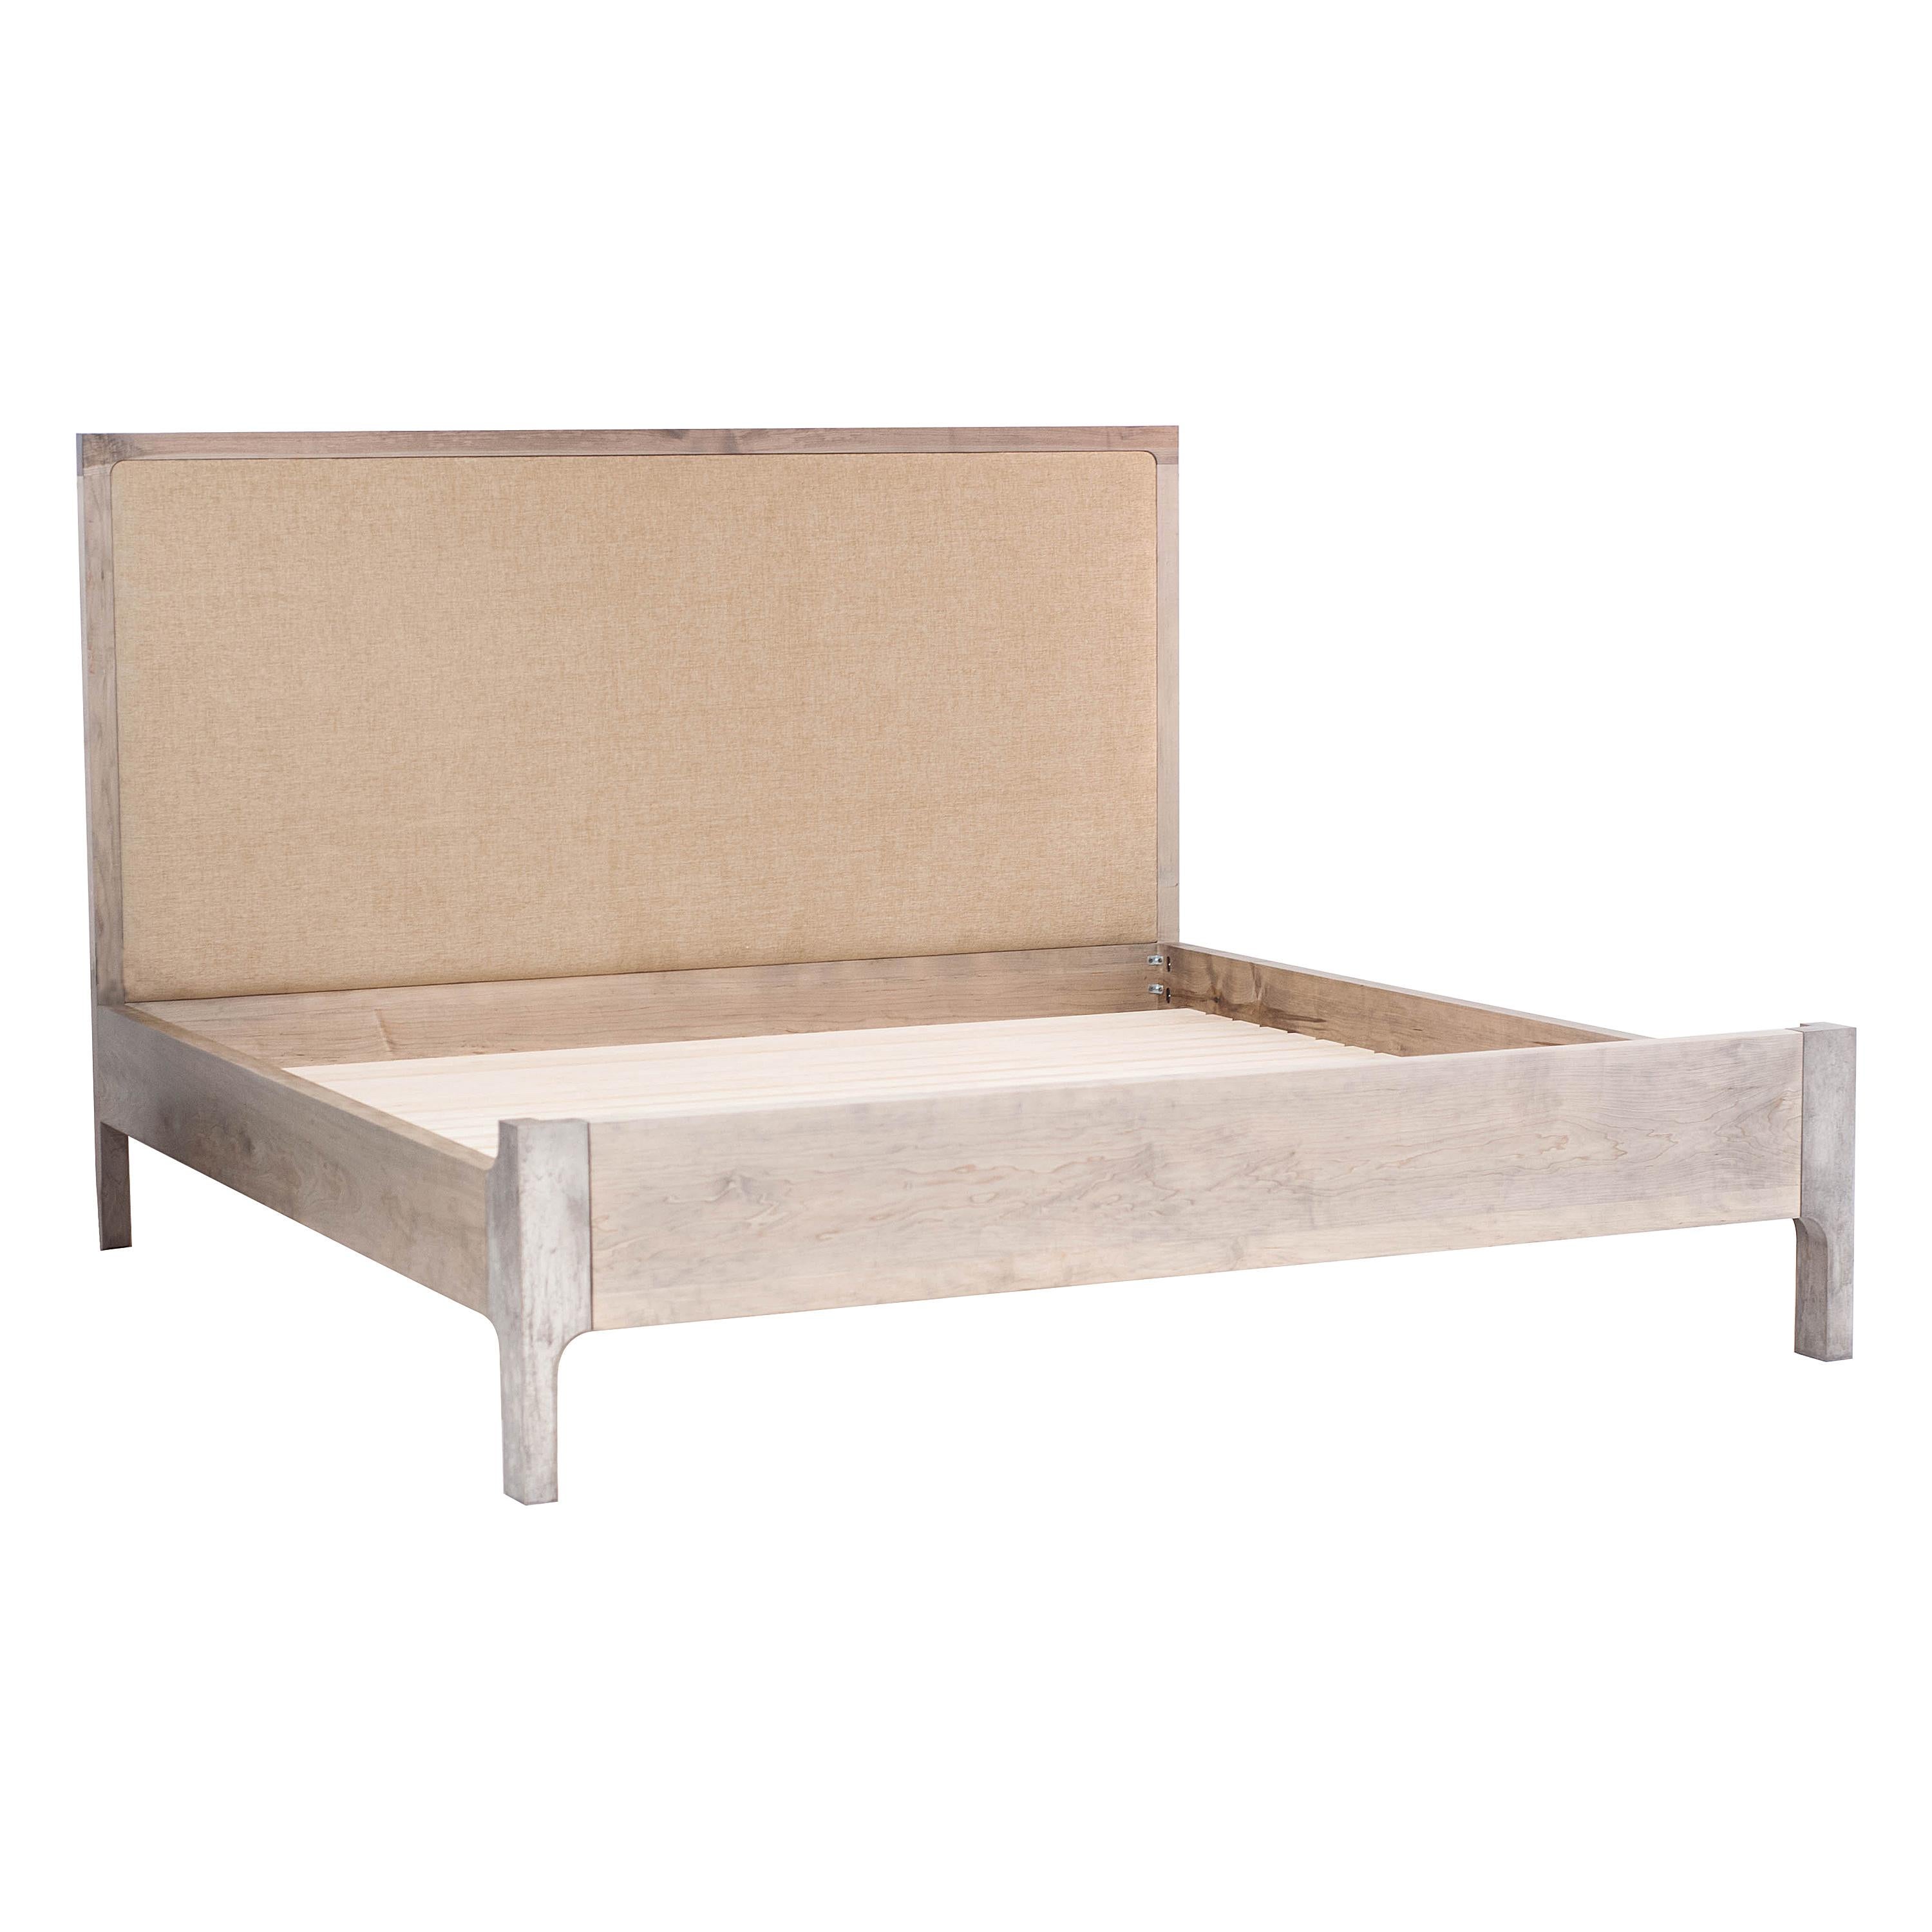 King Size Goby Bed in Oxidized Maple, Upholstered Headboard, Silver Plated Legs